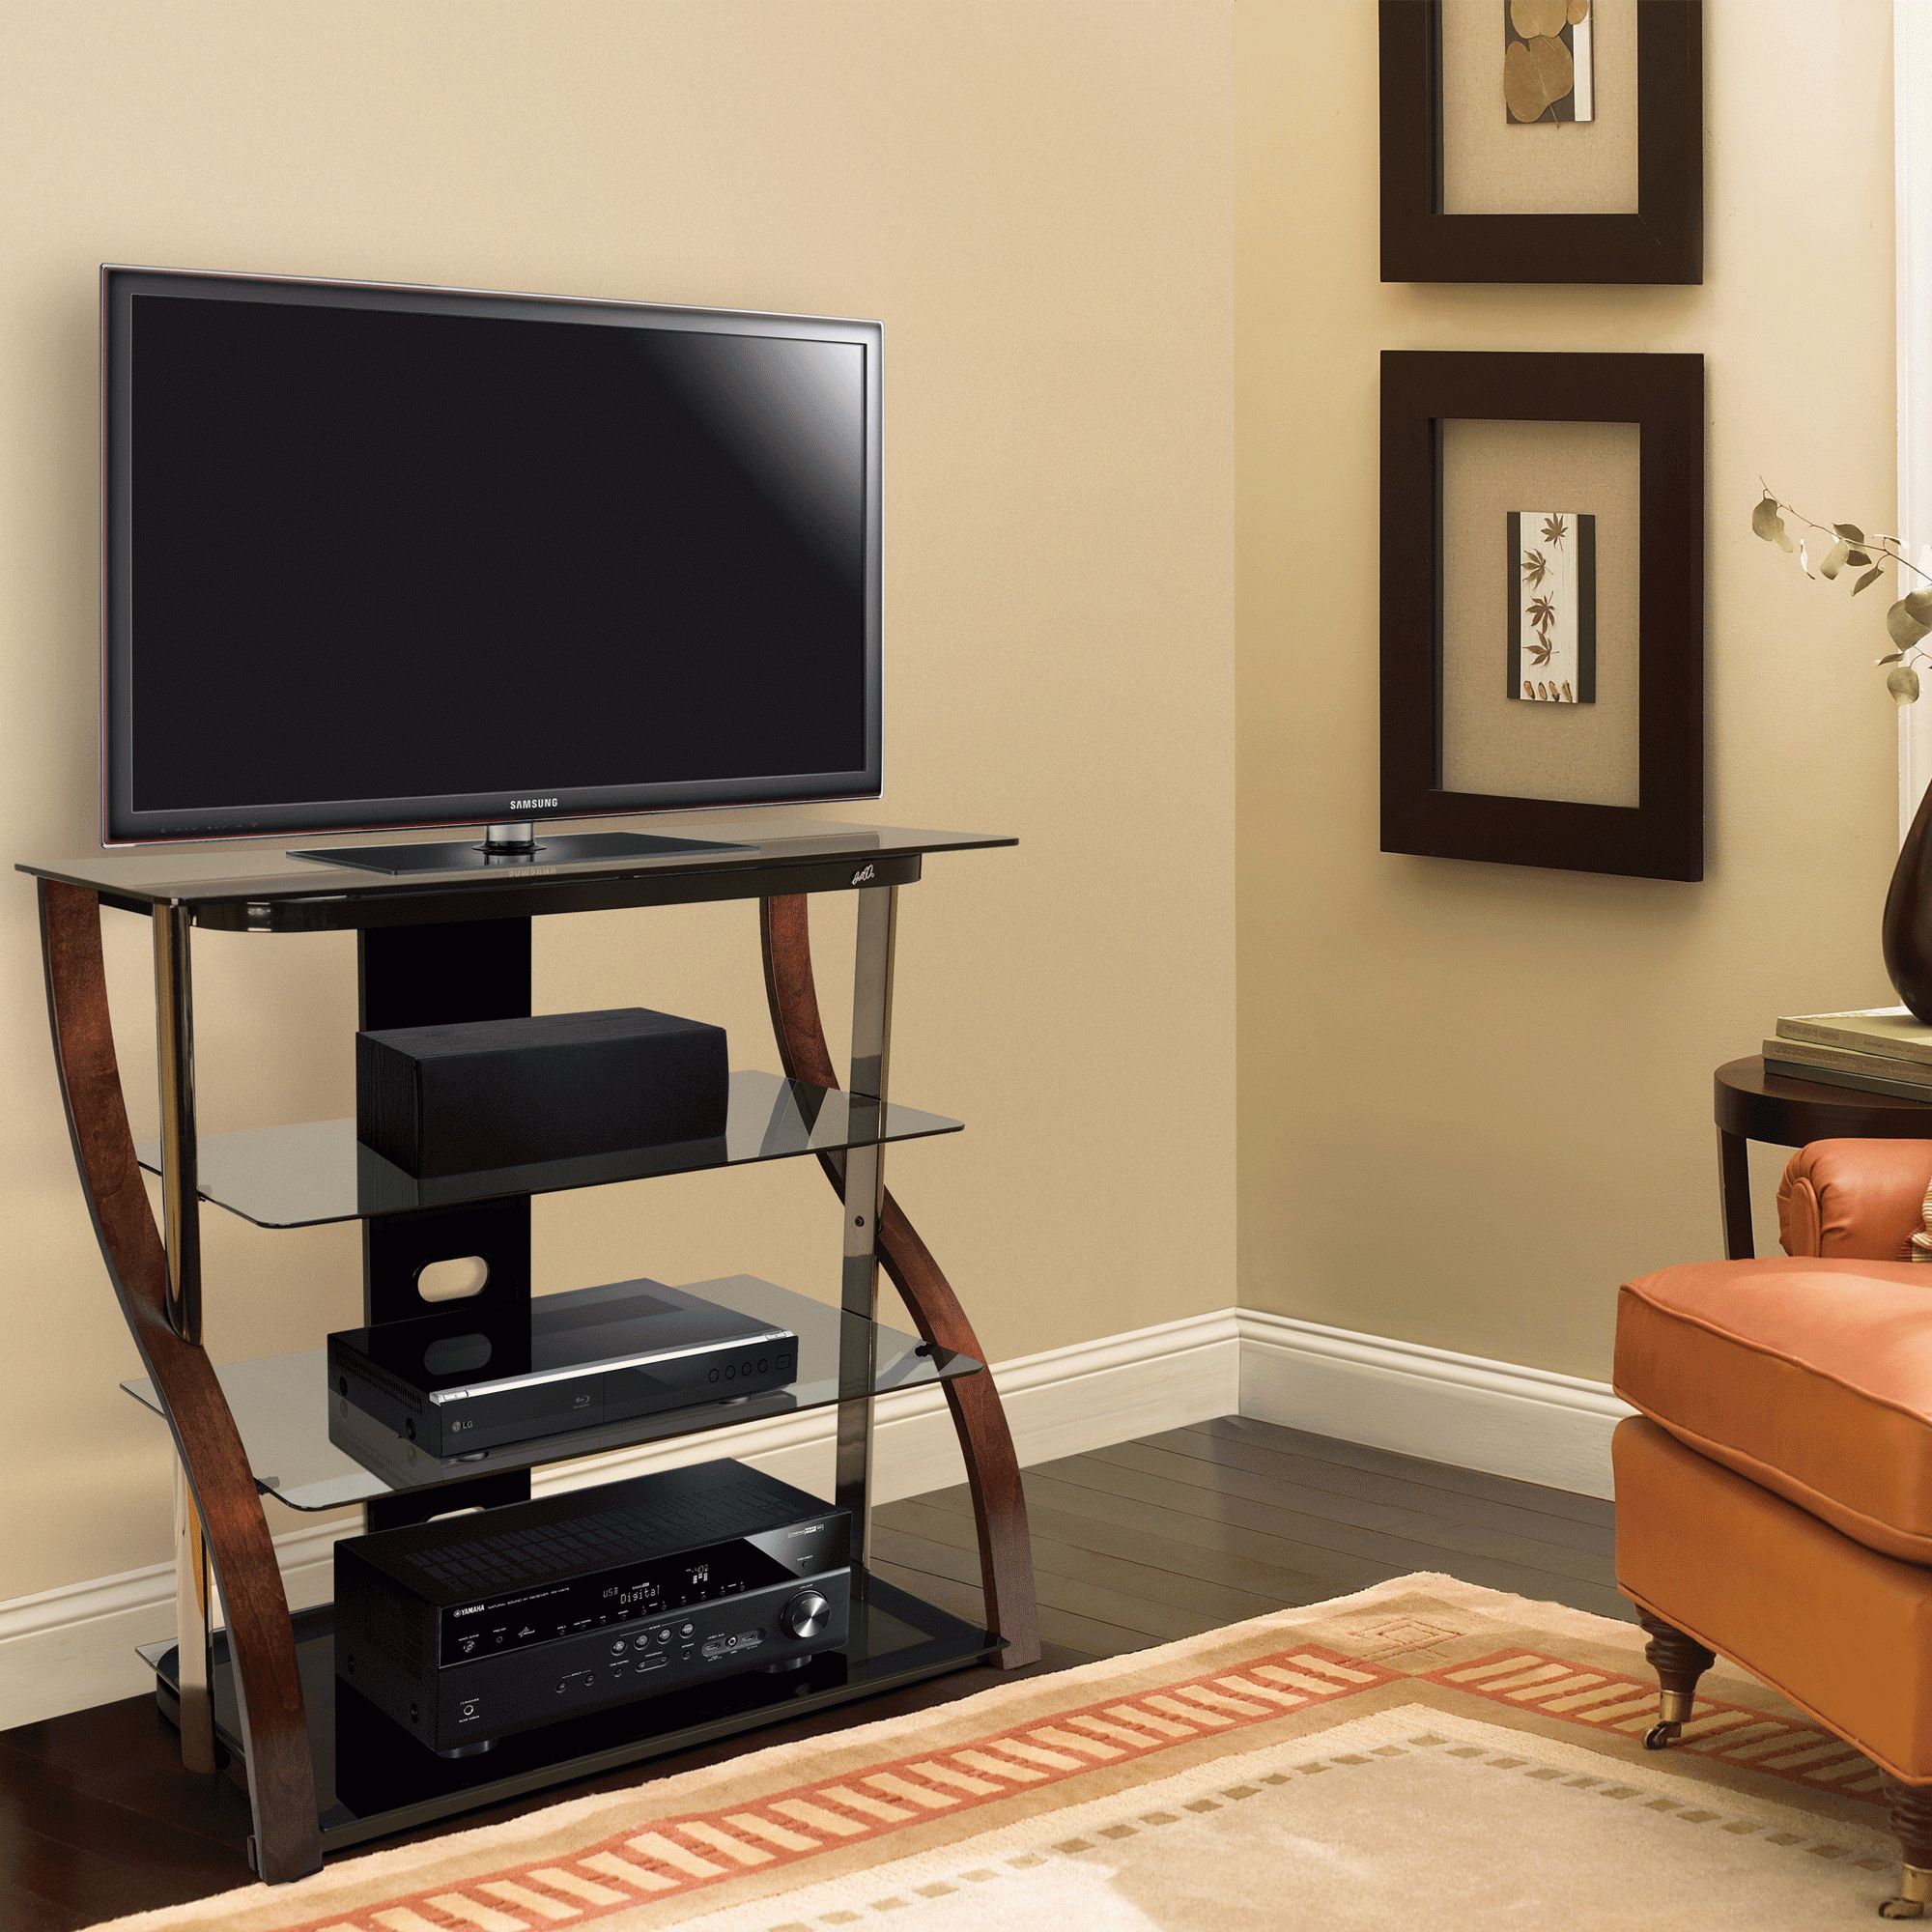 40" Tall Tv Stand For Tvs Up To 42", Espresso | Bedroom Tv Inside Tall Black Tv Cabinets (View 3 of 15)